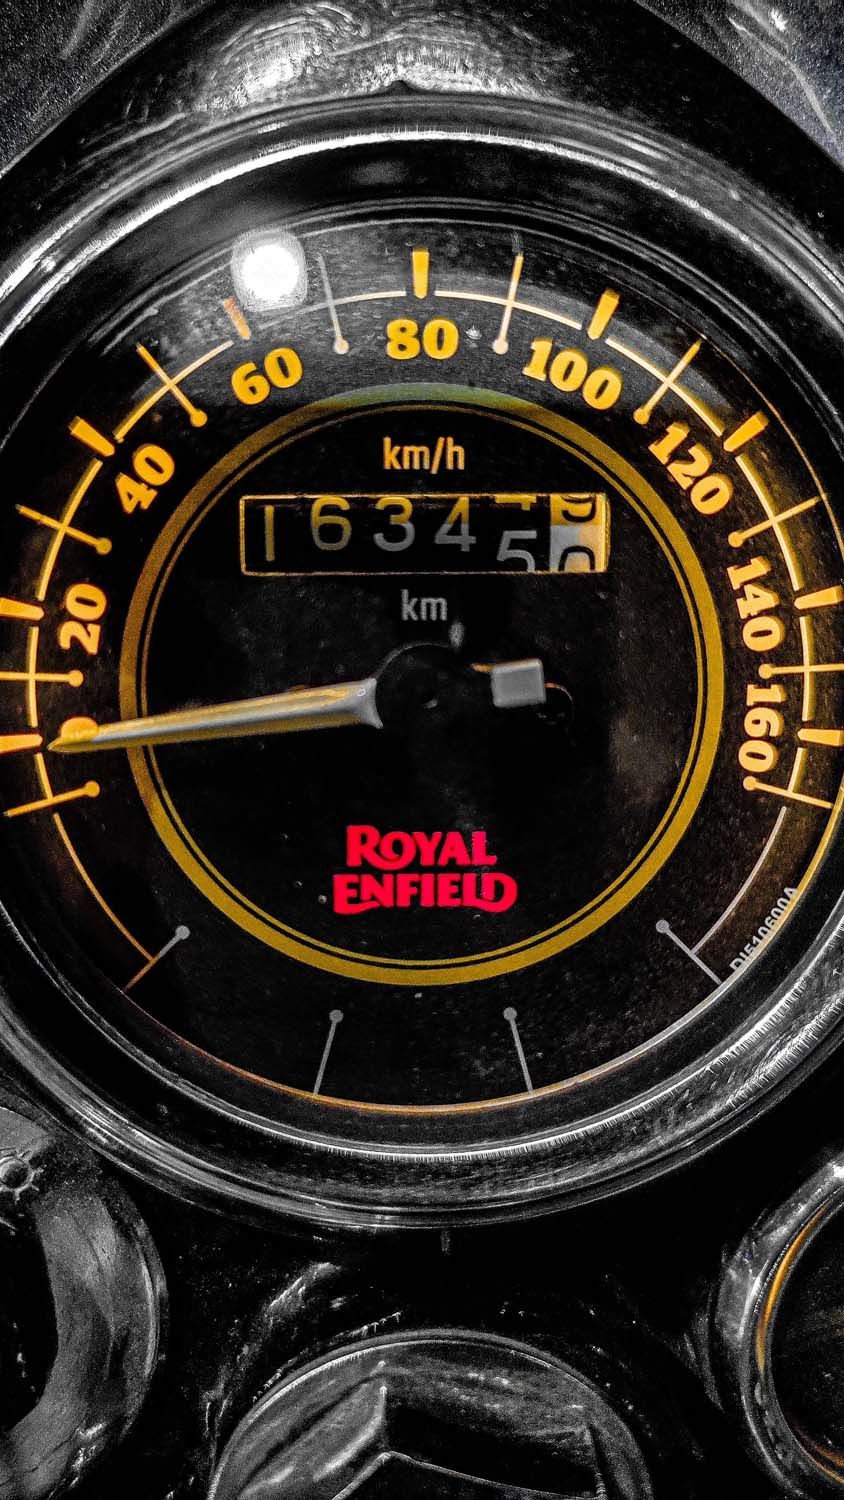 Royal Enfield Photos Download The BEST Free Royal Enfield Stock Photos  HD  Images